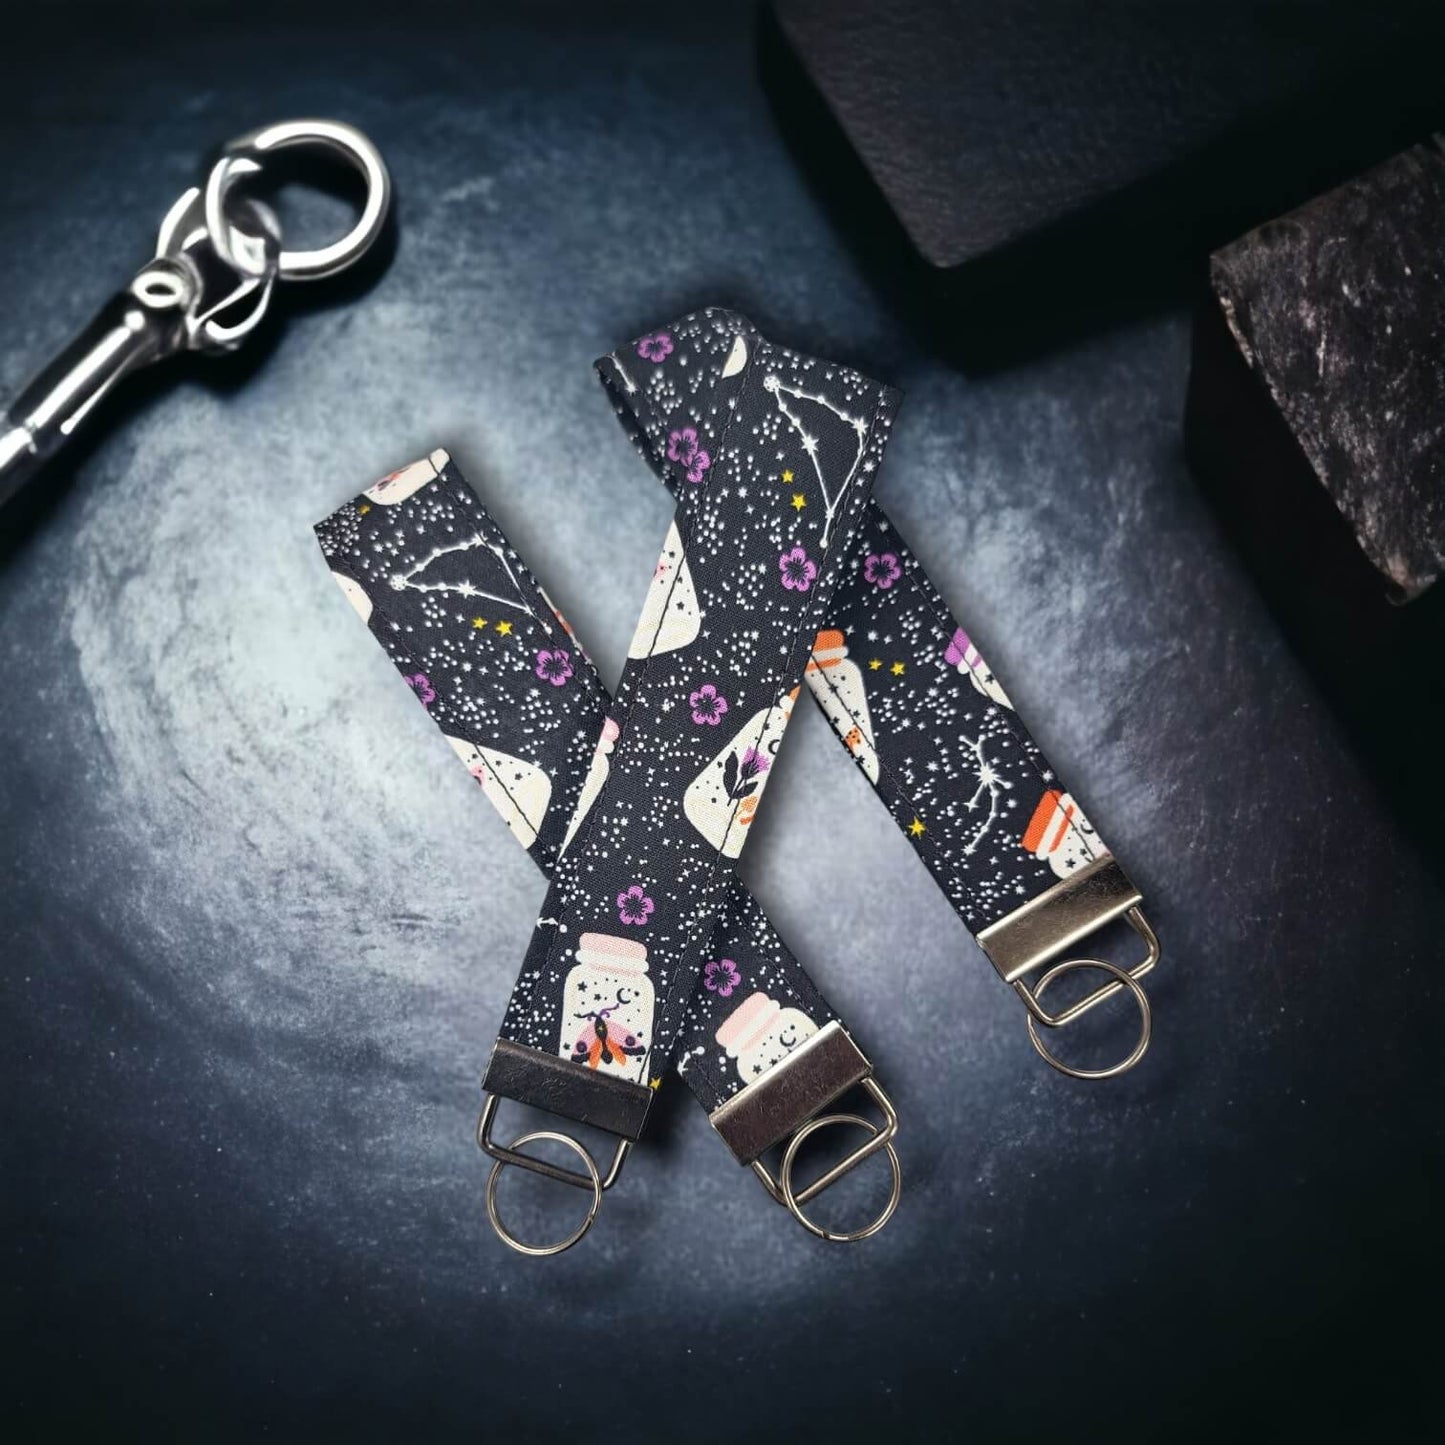 Our key wristlets/fobs in the pattern Light the Way.